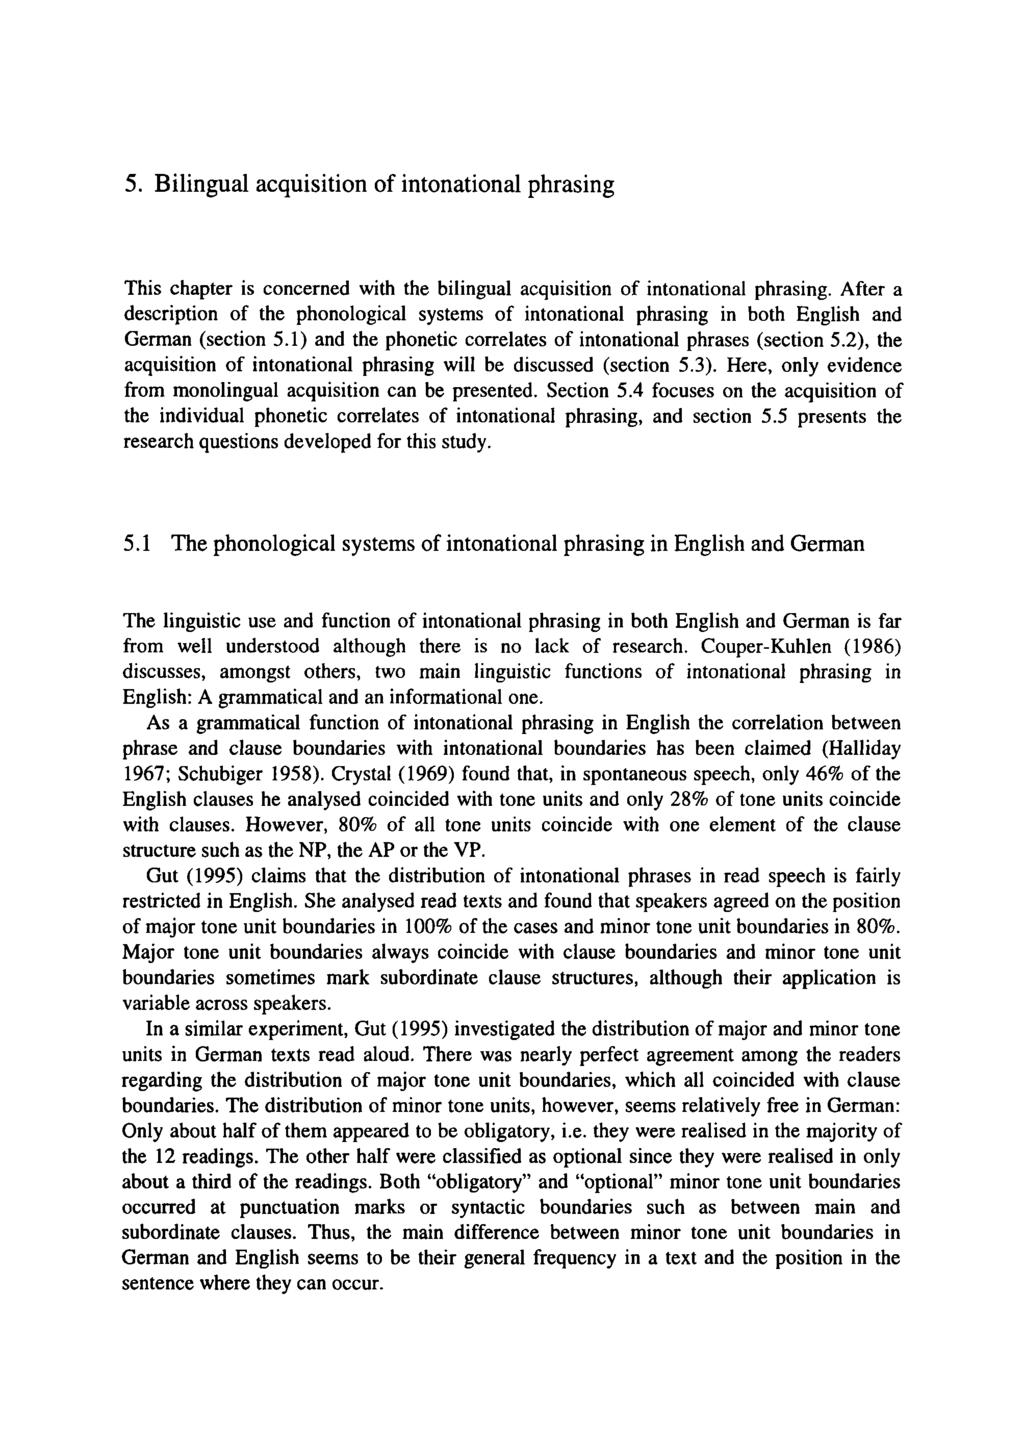 5. Bilingual acquisition of intonational phrasing This chapter is concerned with the bilingual acquisition of intonational phrasing.